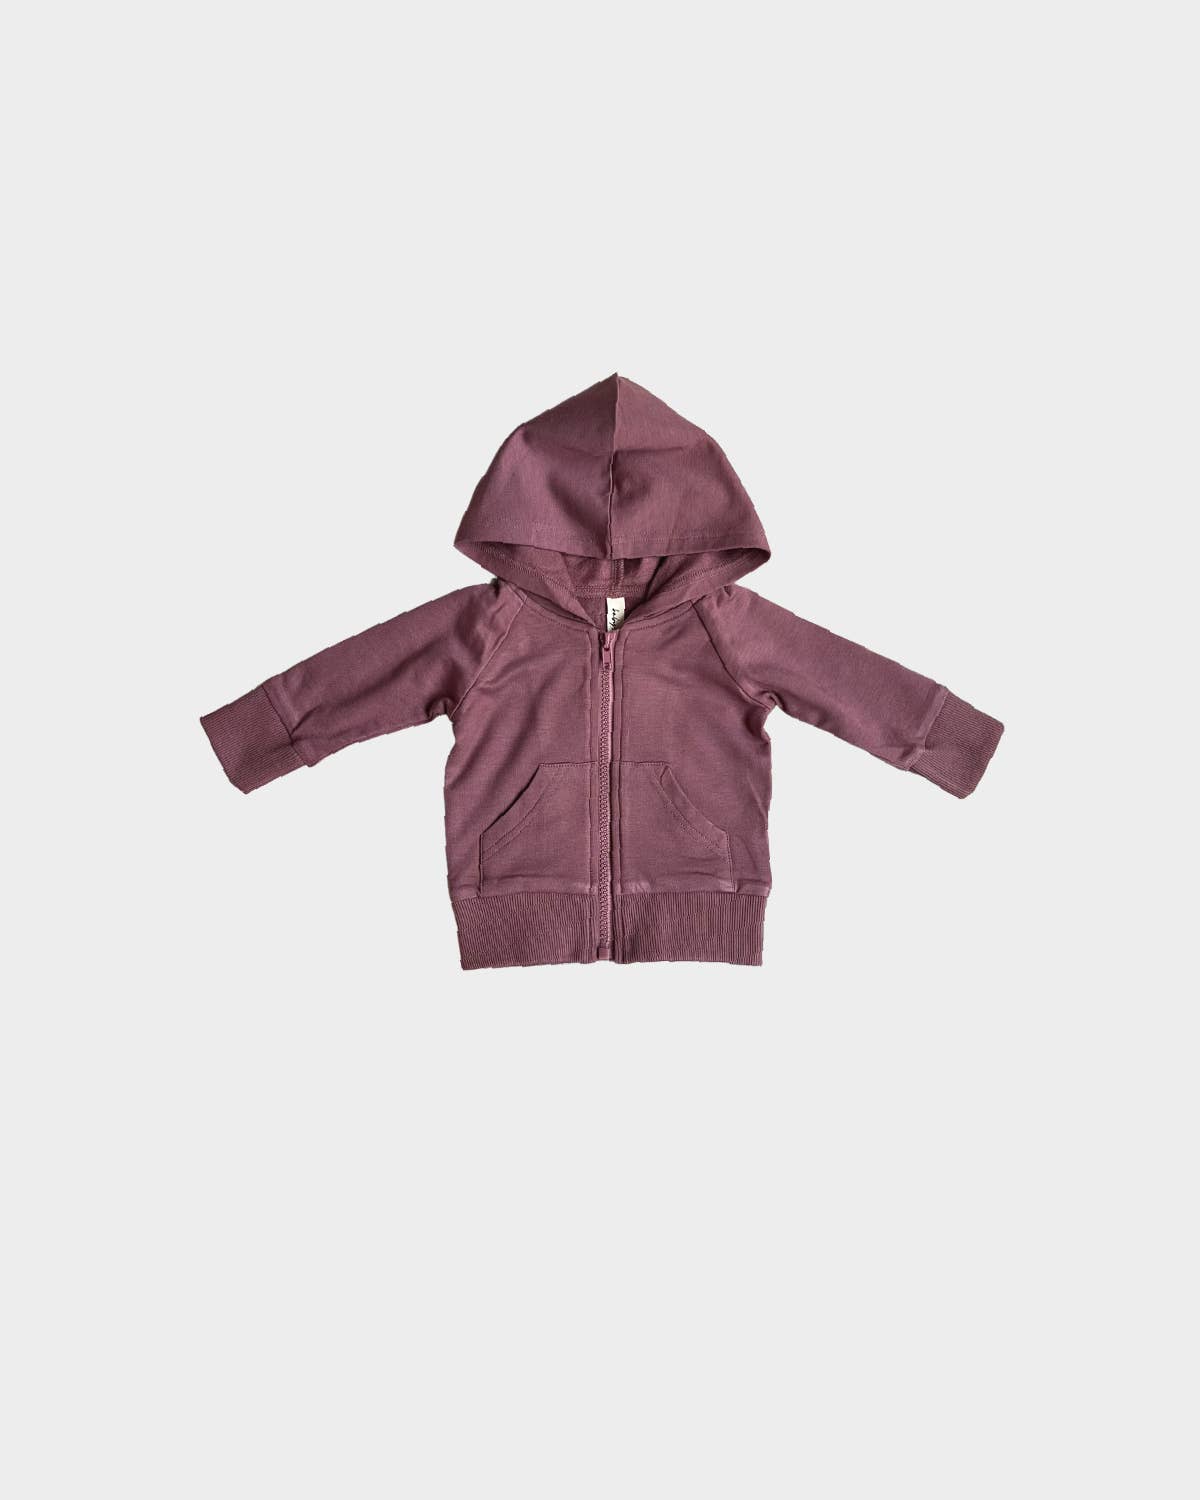 babysprouts clothing company - F23 D2: Kids Hooded Jacket in Plum